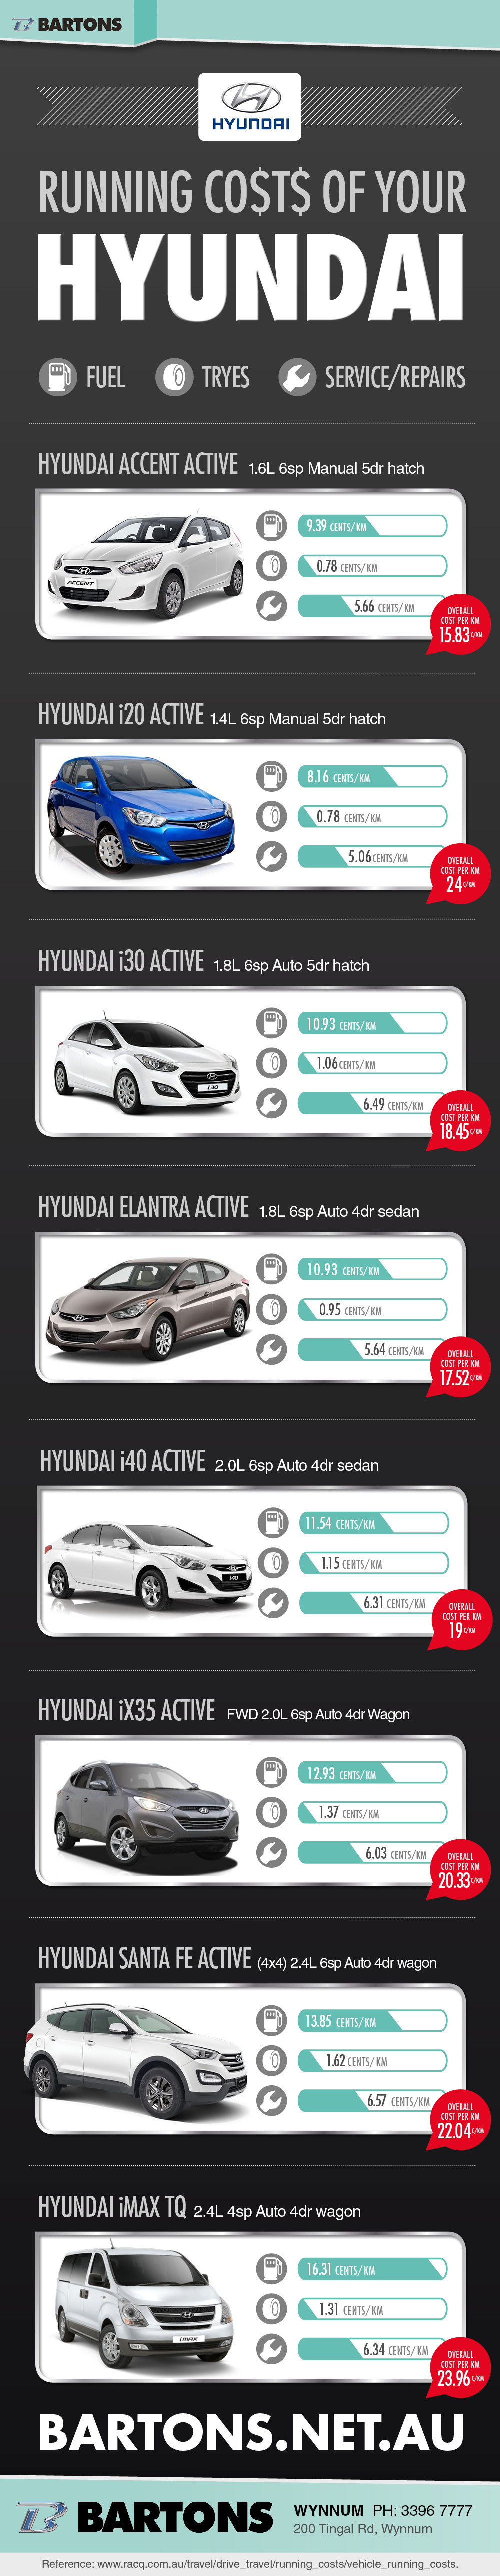 The Running Costs of Your Hyundai Infographic